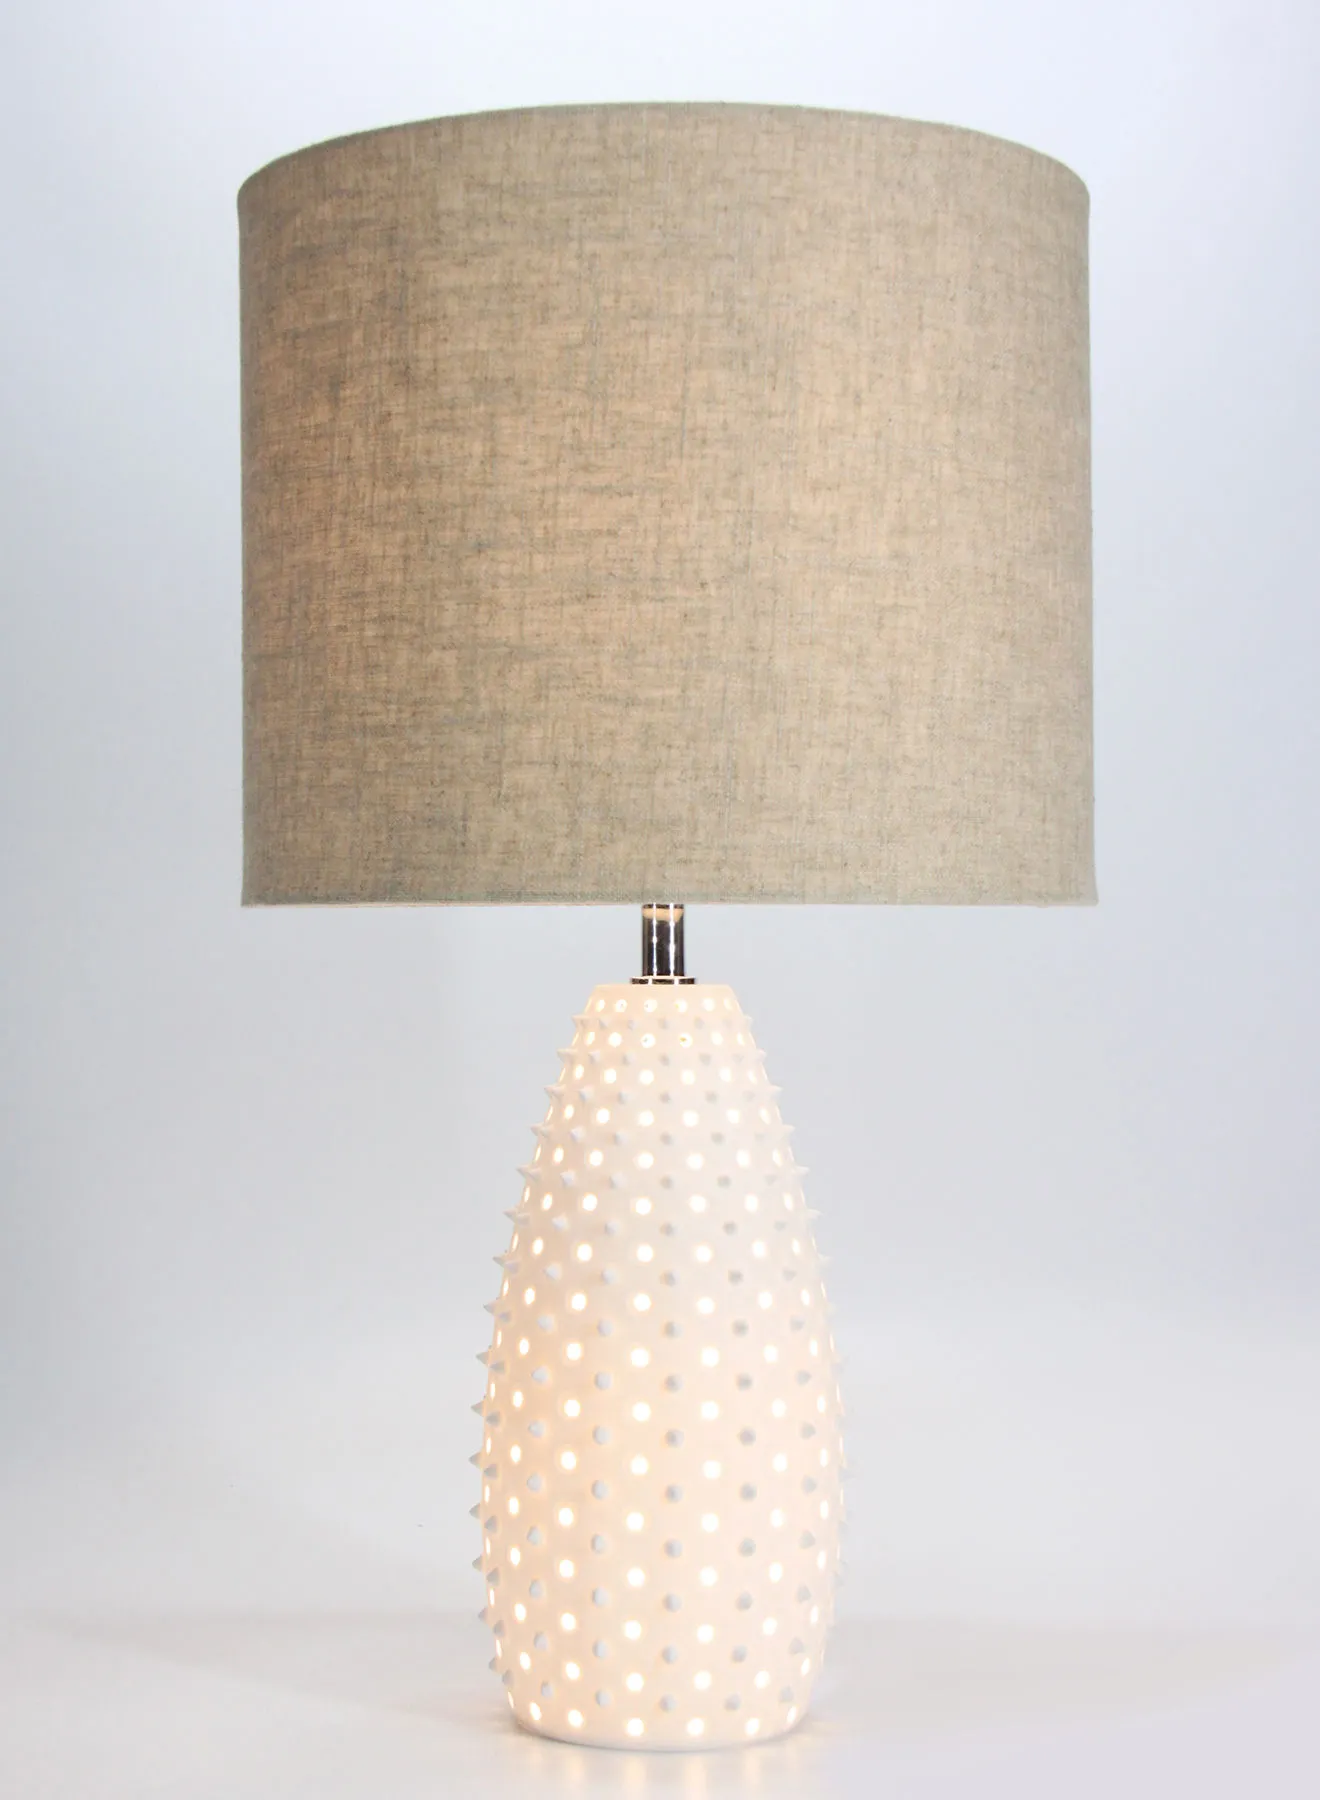 Switch Spike Porcelain Table Lamp | Lampshade Unique Luxury Quality Material for the Perfect Stylish Home D182-54 White 33.5x33.5x41.5cm